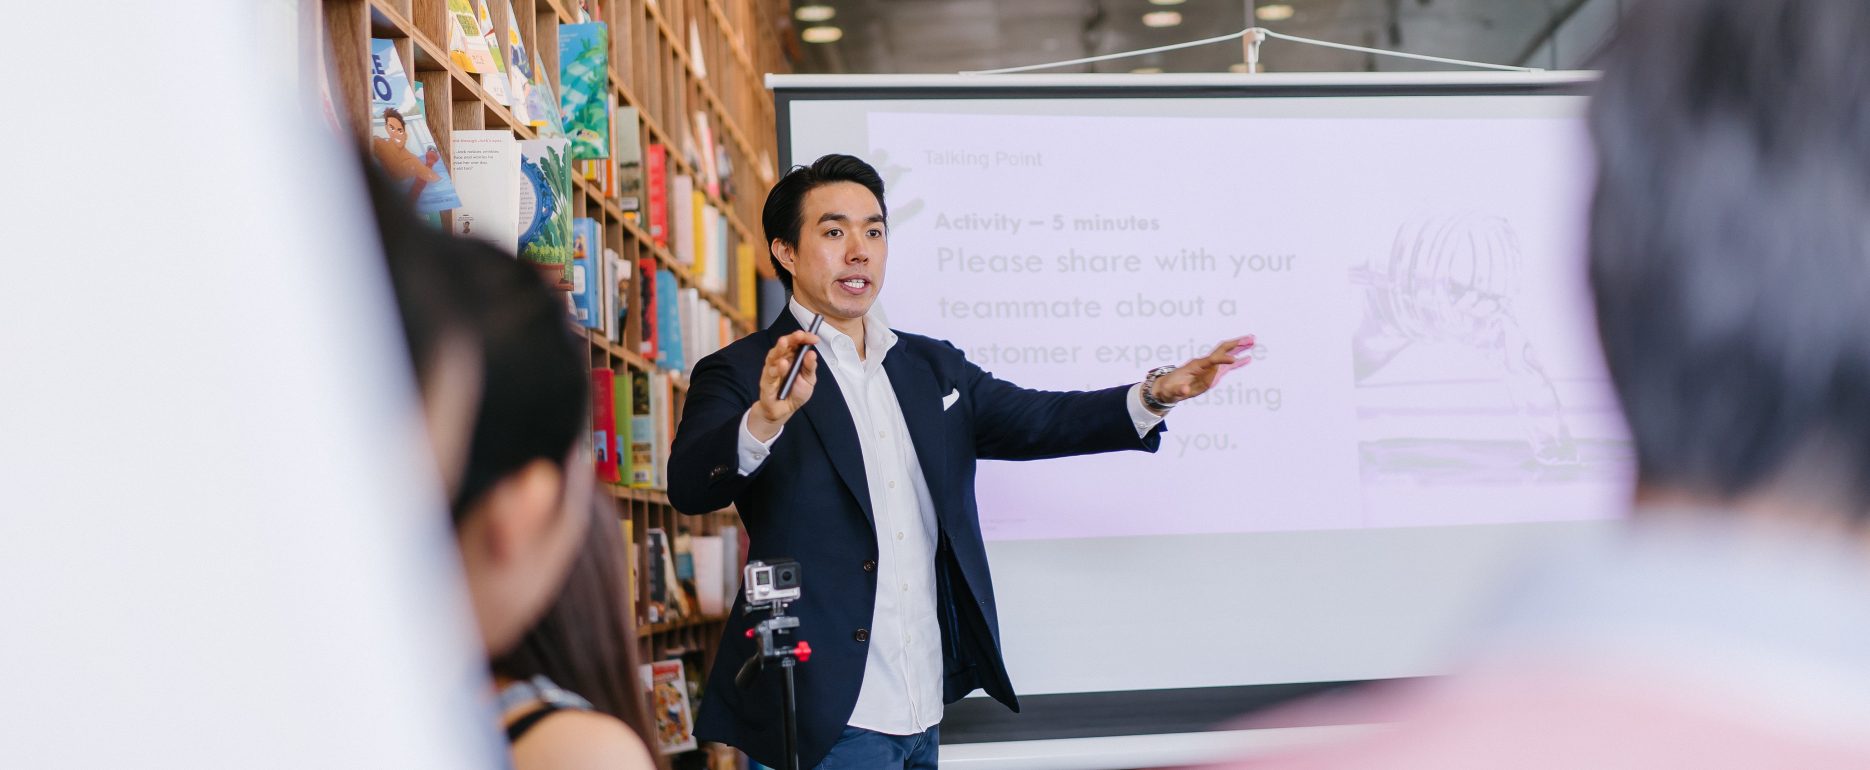 A man presenting to a group of attentive individuals